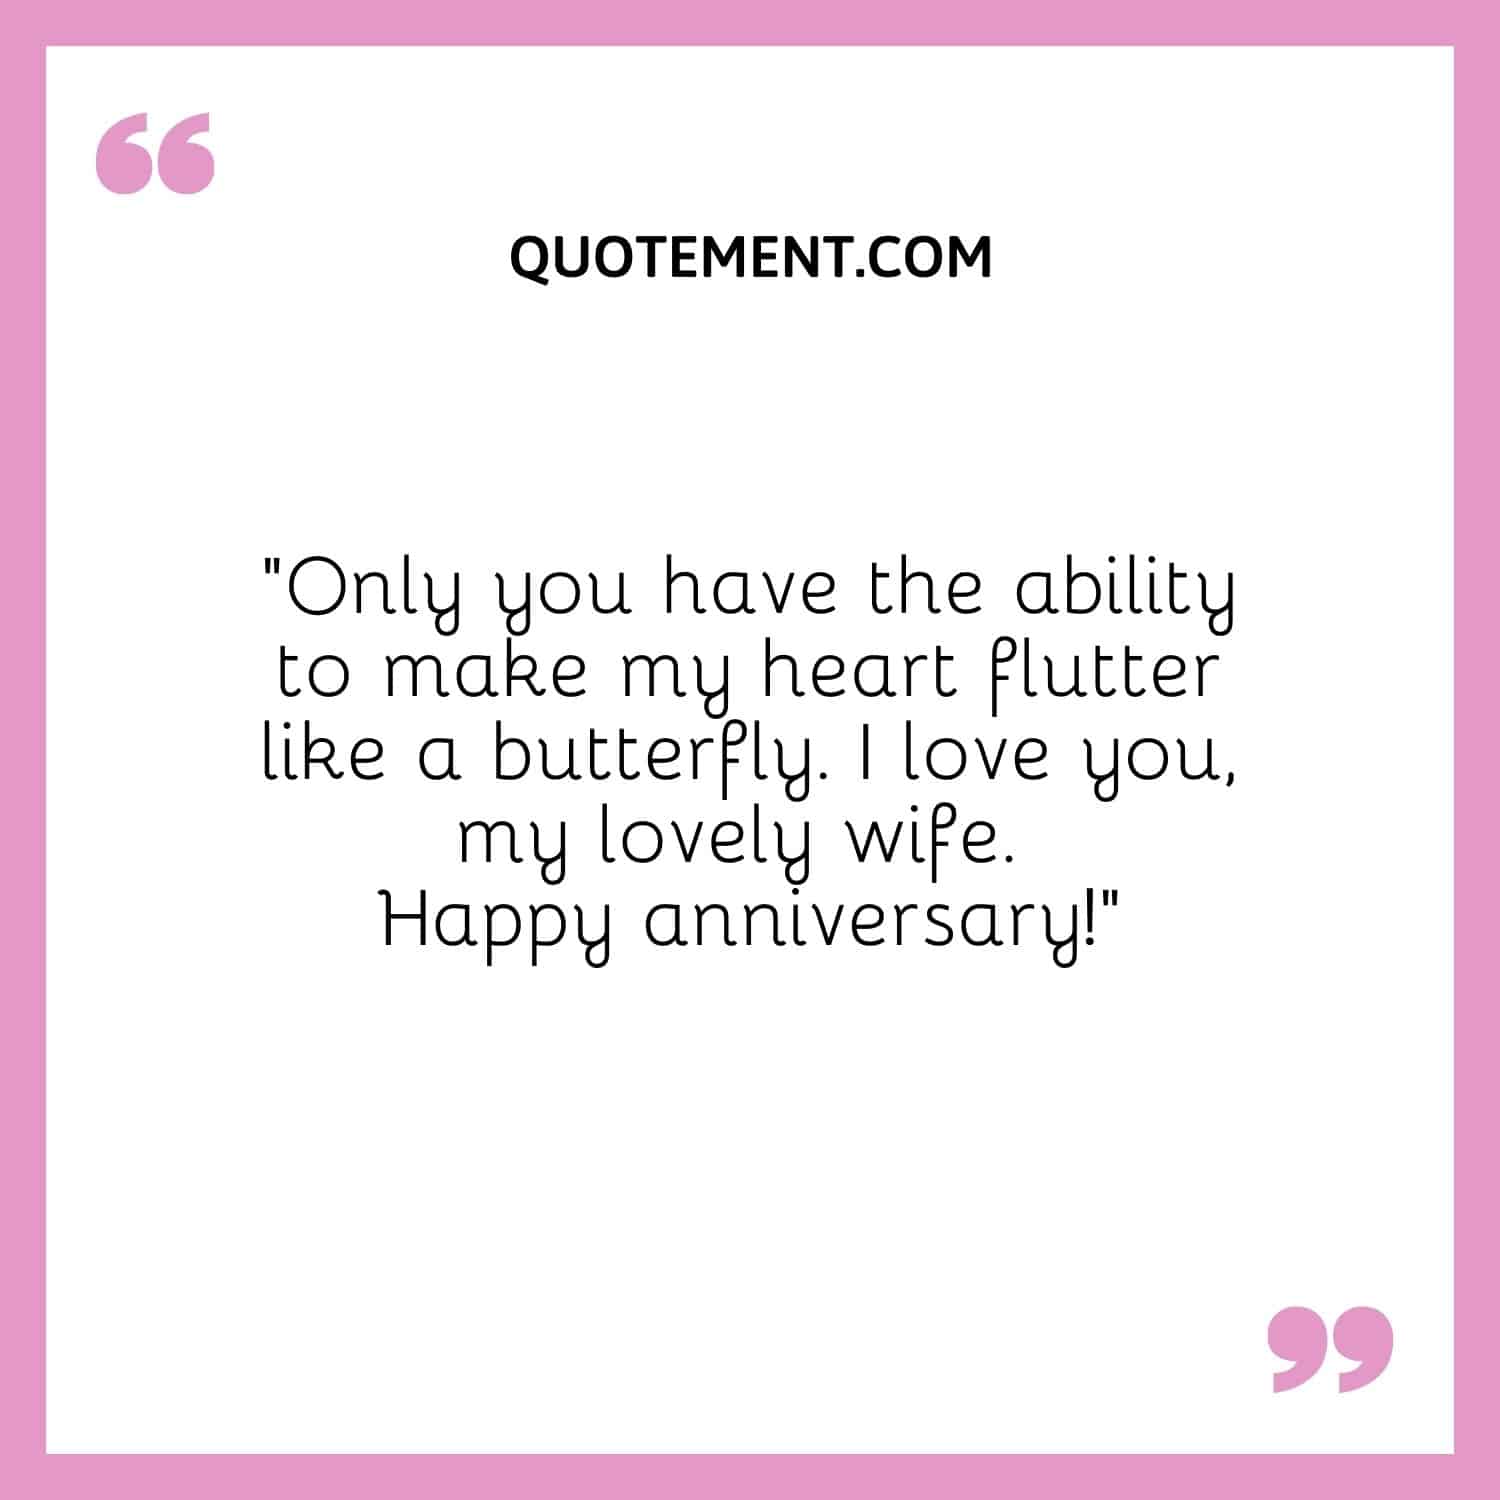 “Only you have the ability to make my heart flutter like a butterfly. I love you, my lovely wife. Happy anniversary!”